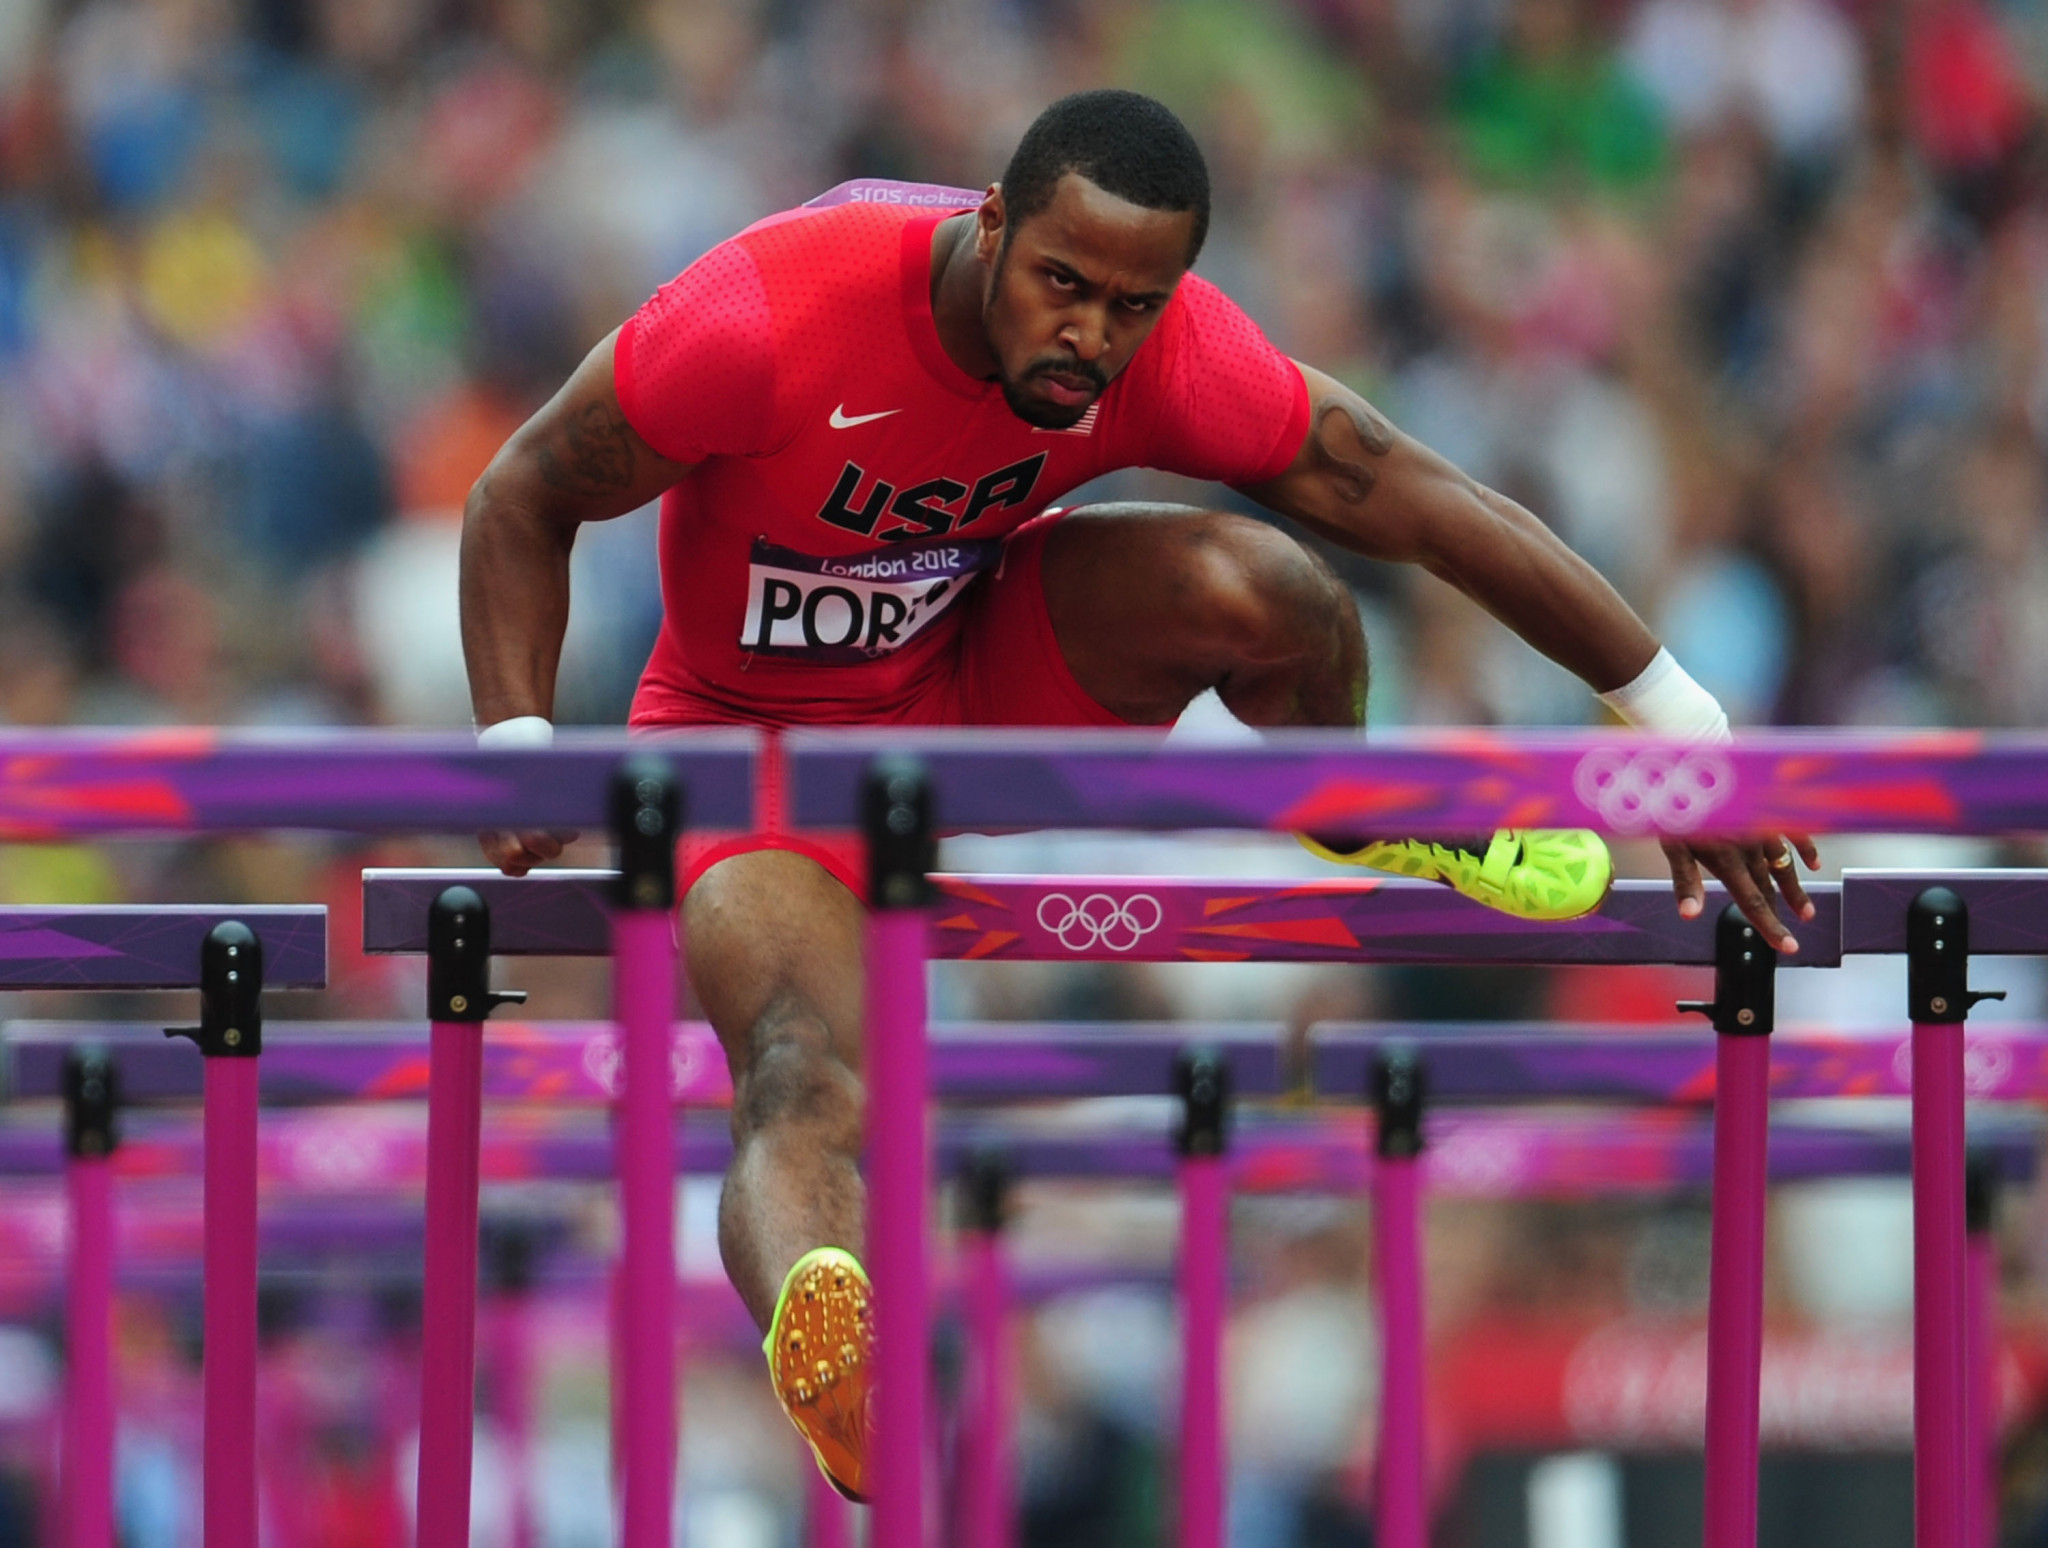 American hurdler Jeff Porter will sit on the WADA Athlete Committee next year ©Getty Images